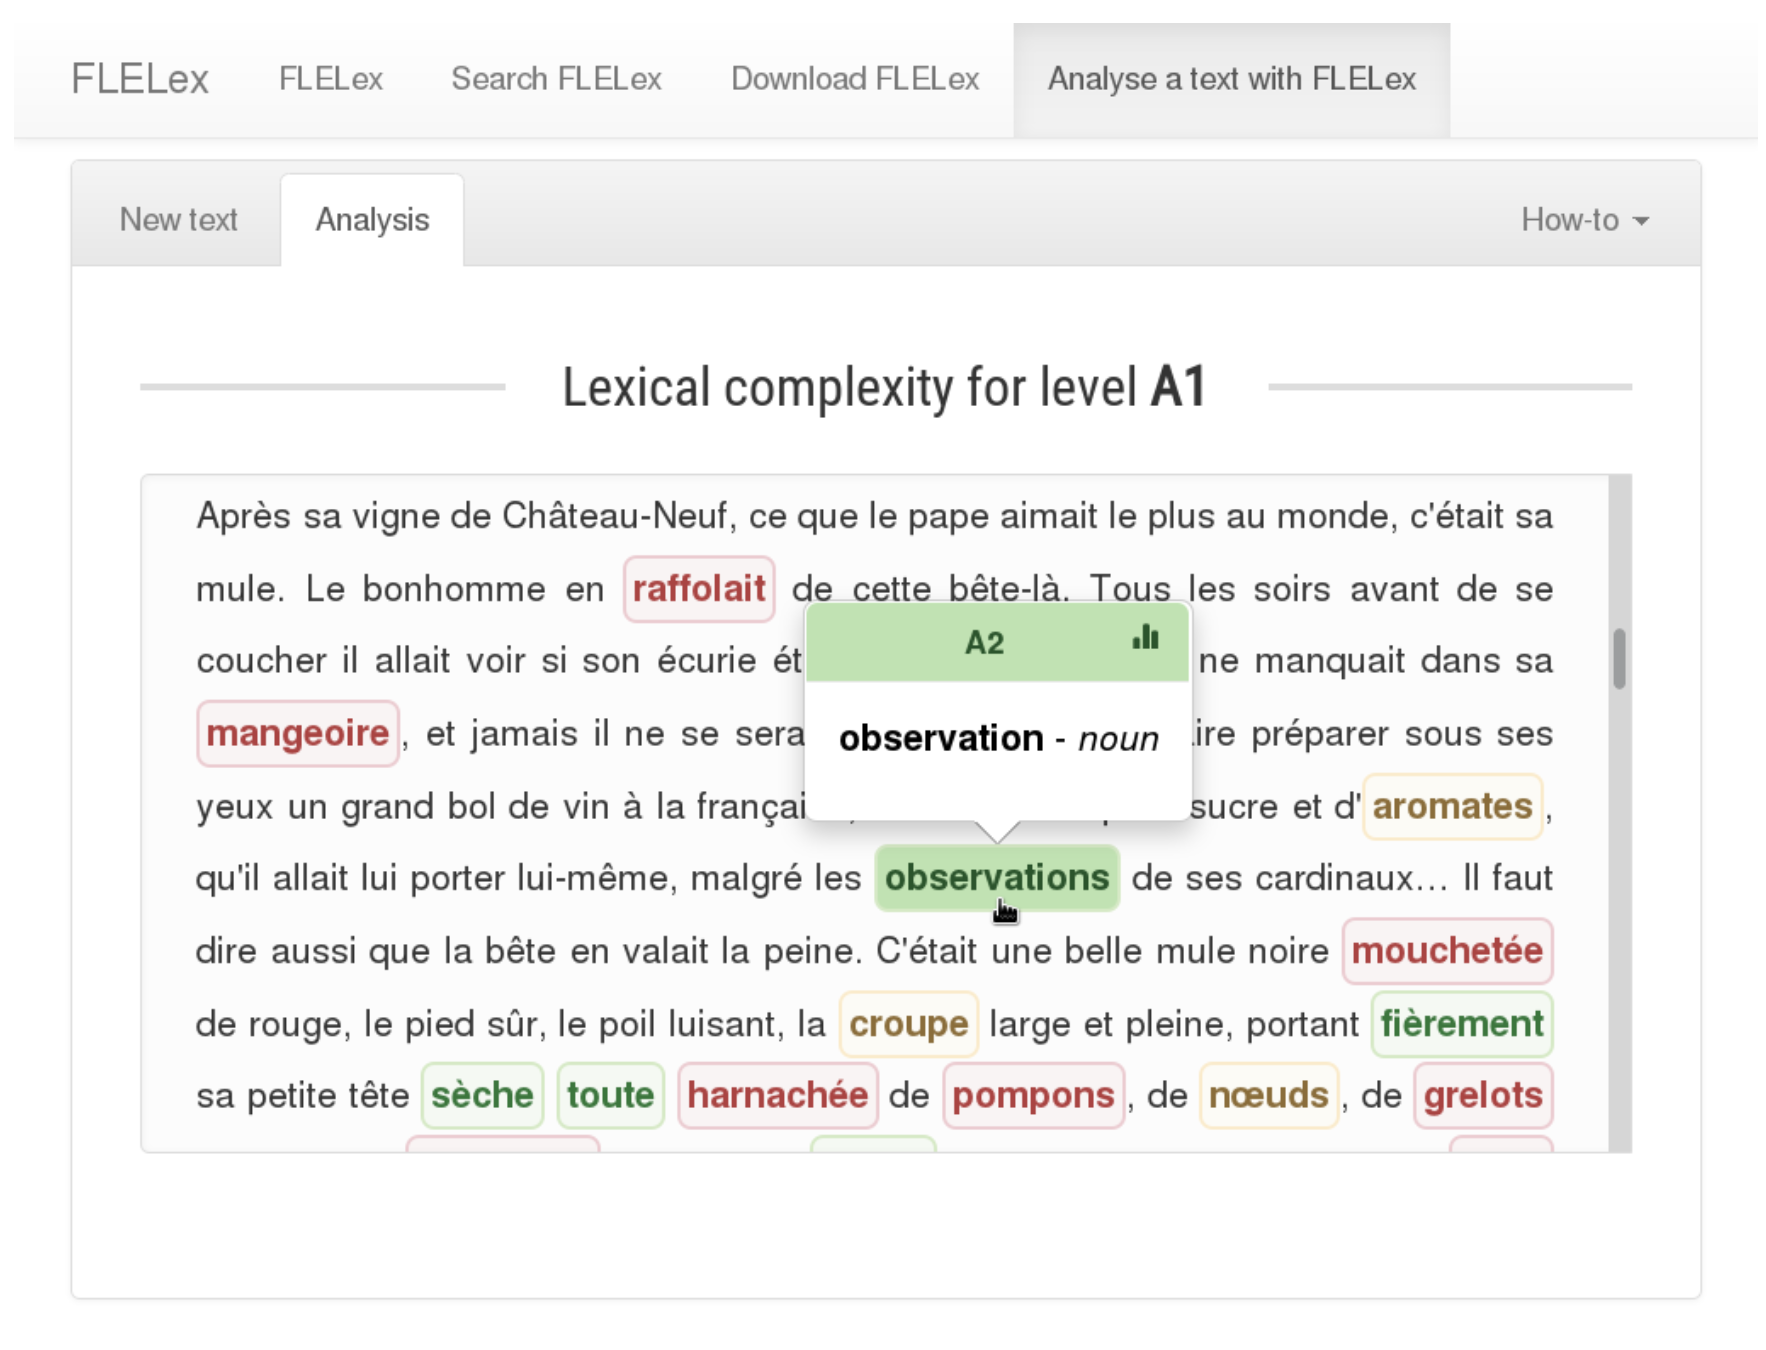 First version of a tool for analyzing lexical complexity